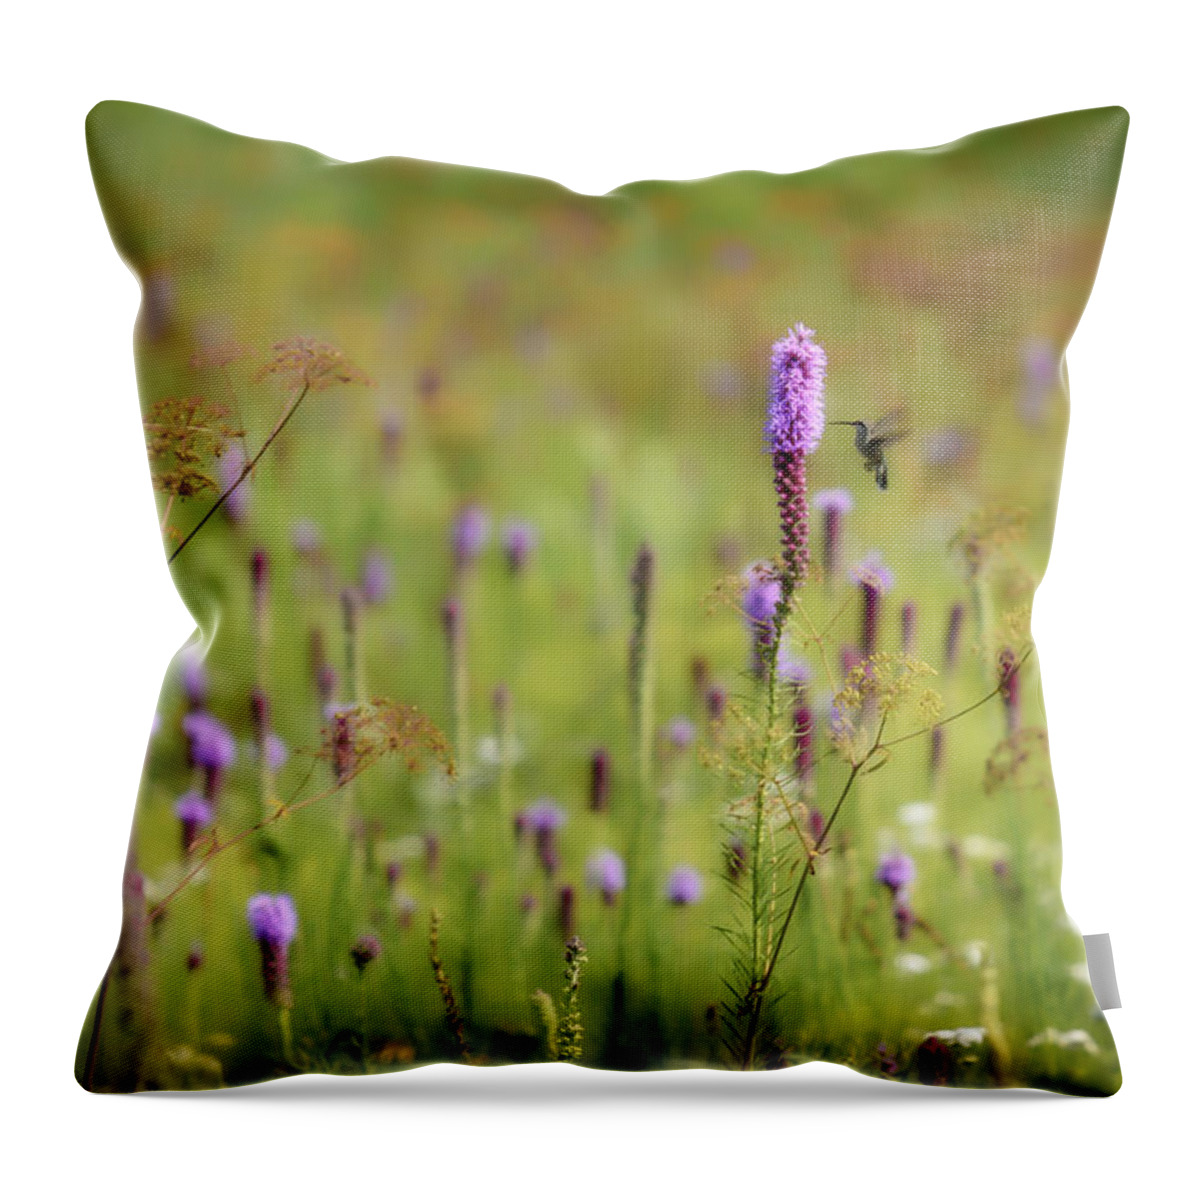 Presson-oglesby Preserve Throw Pillow featuring the photograph Hummingbird Dream by James Barber